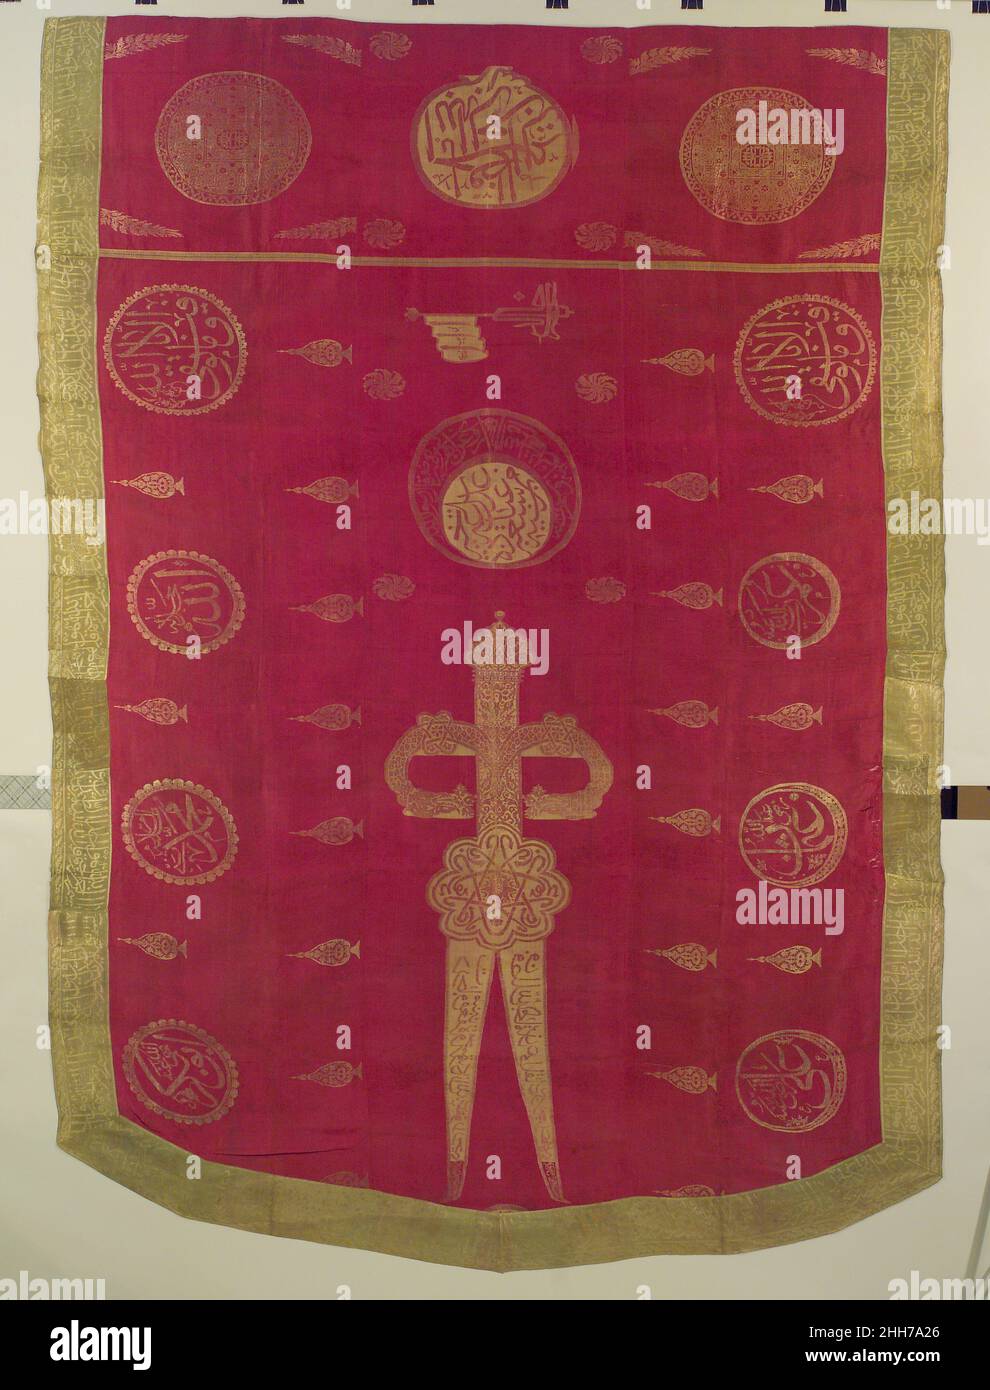 Banner dated A.H. 1235/ A.D. 1819–20 Inscribed with the names of God, the Prophet Muhammad and the first four leaders of the Muslim community, and bordered by Qur'anic verses, this silk sanjak (shield-shaped banner) displays an image of a two-bladed sword with a dragon-headed hilt. Referred to as Dhu'l Fiqar and associated with military victory, this sword is said to have belonged to 'Ali, the cousin and son-in-law of the Prophet. While Ottoman banners similar to this one were used as military insignia from the 15th century onward, this example bears an early 19th century date, and may have be Stock Photo